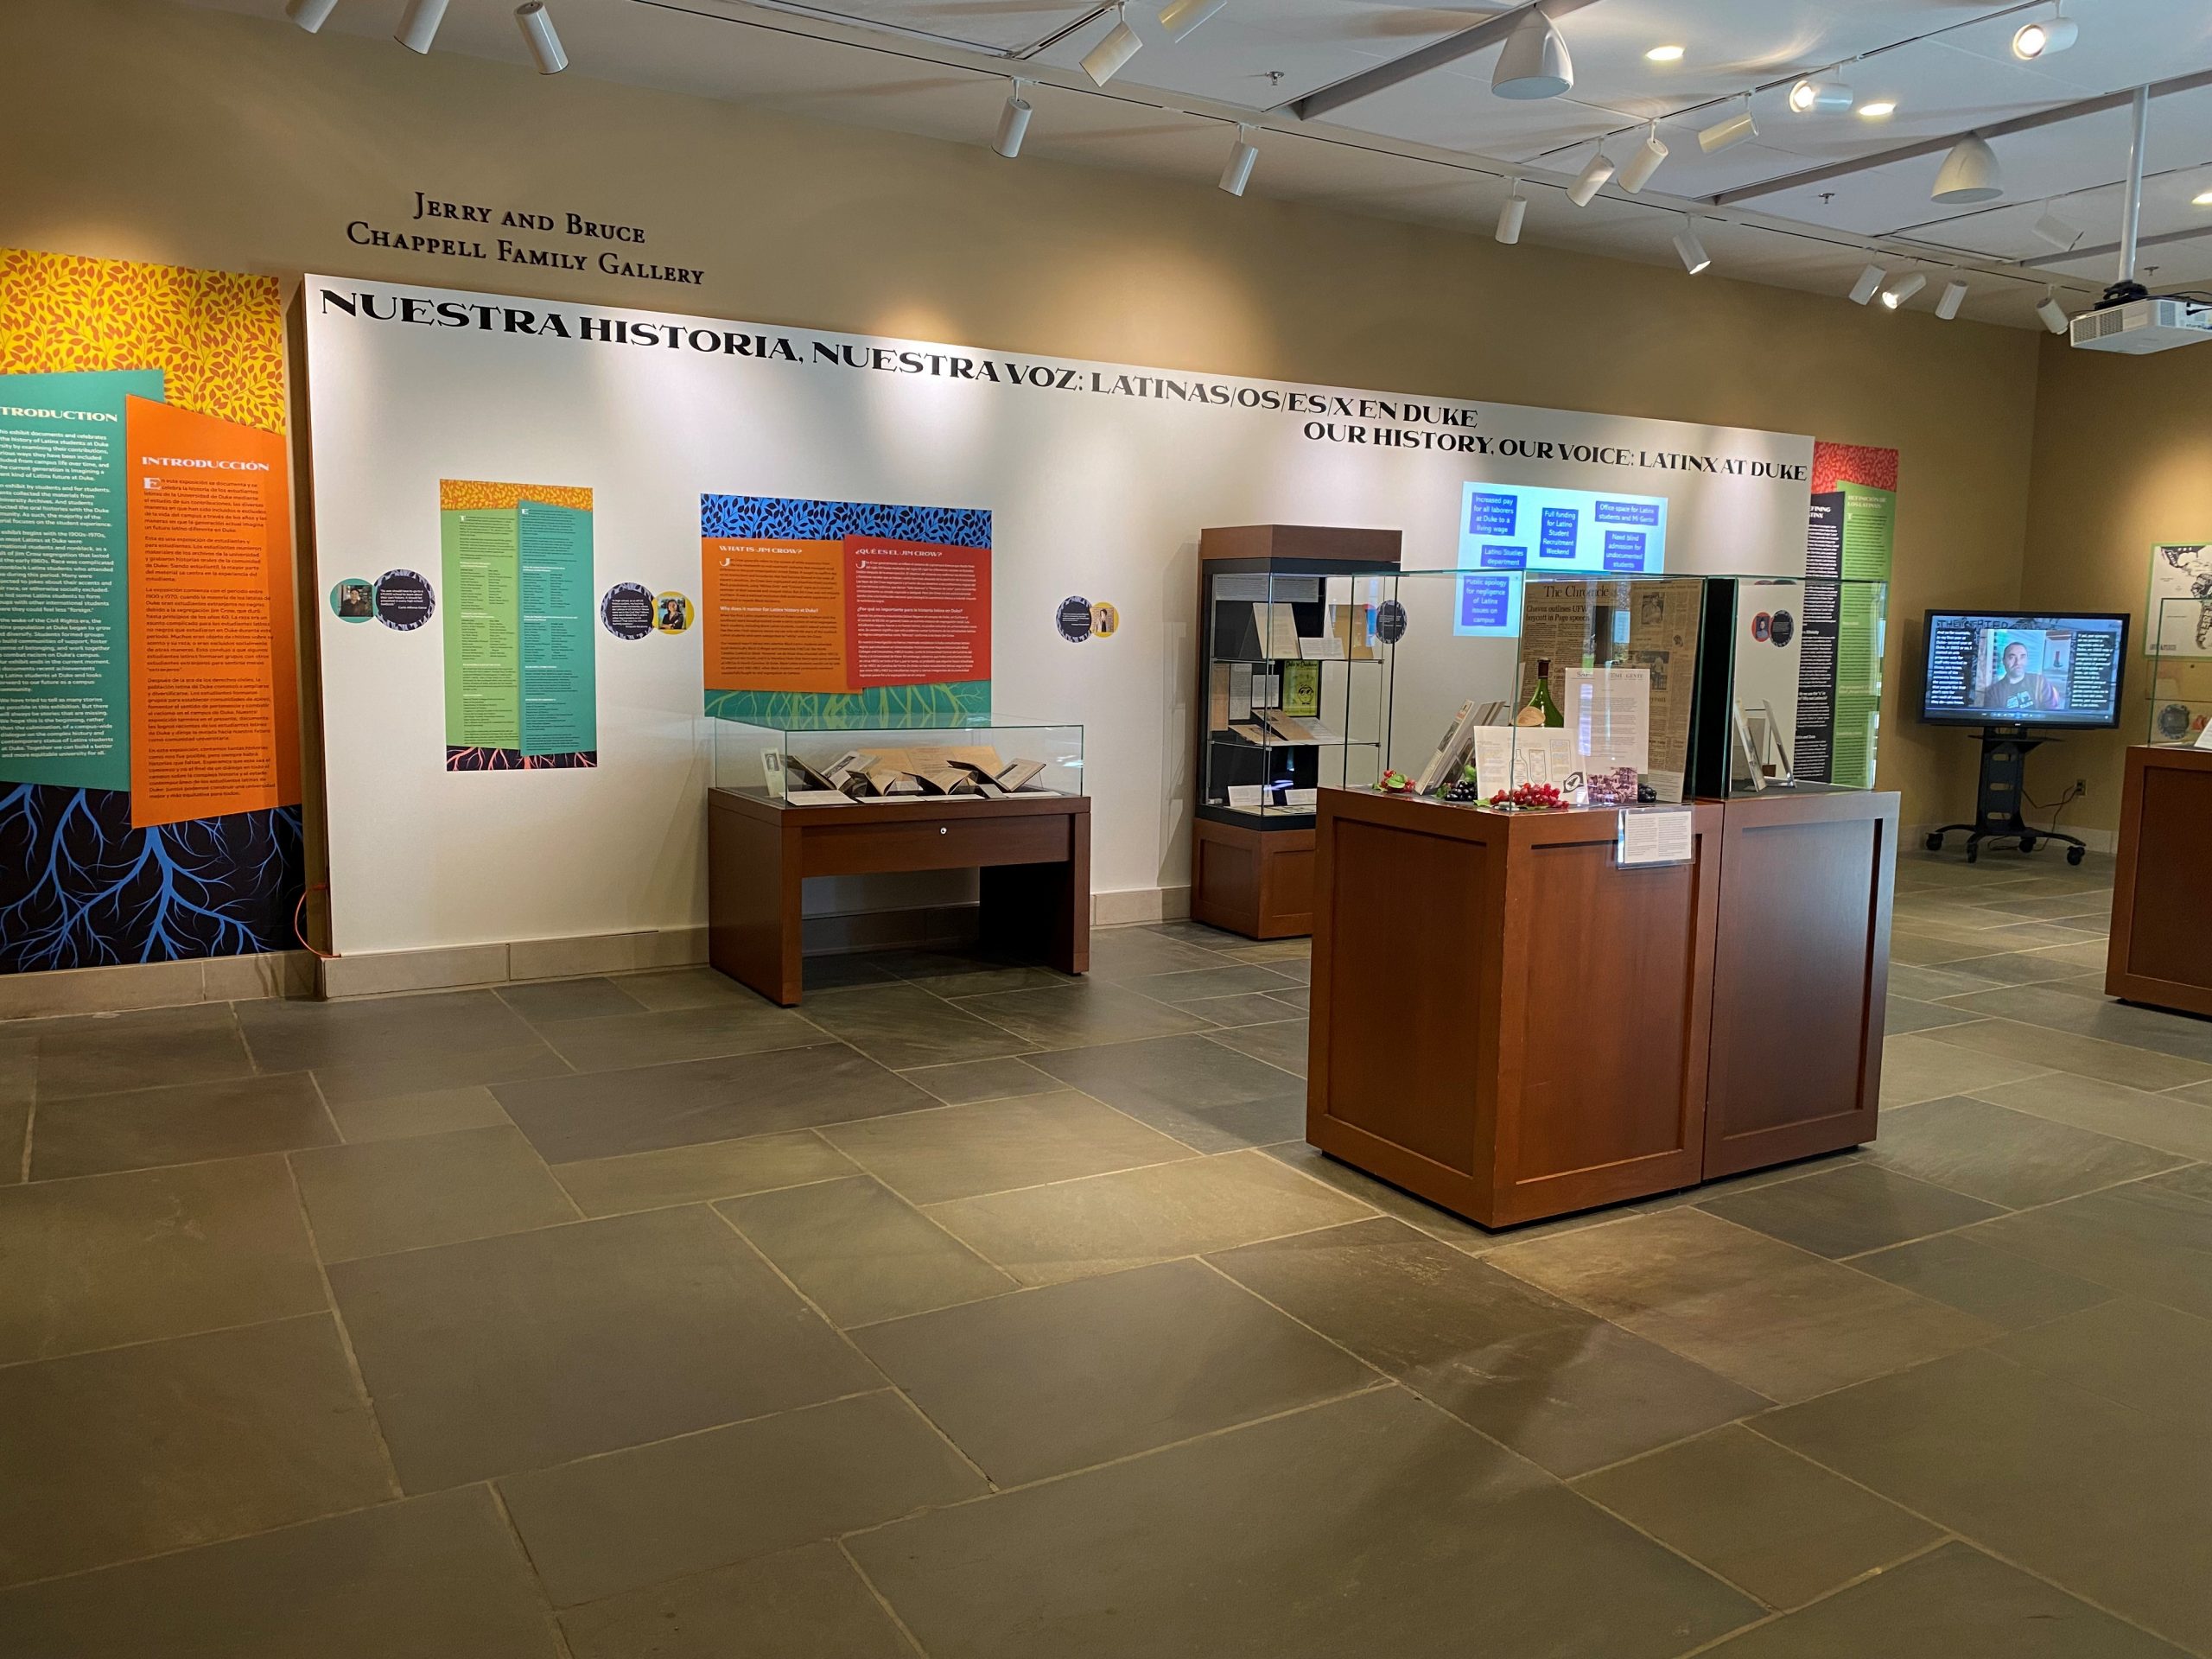 Photograph of the "Our History, Our Voice" exhibit. The exhibit's title appears on the far wall, which is also lined with colorful exhibit panels and exhibit cases. Two exhibit cases display materials in the center of the room.